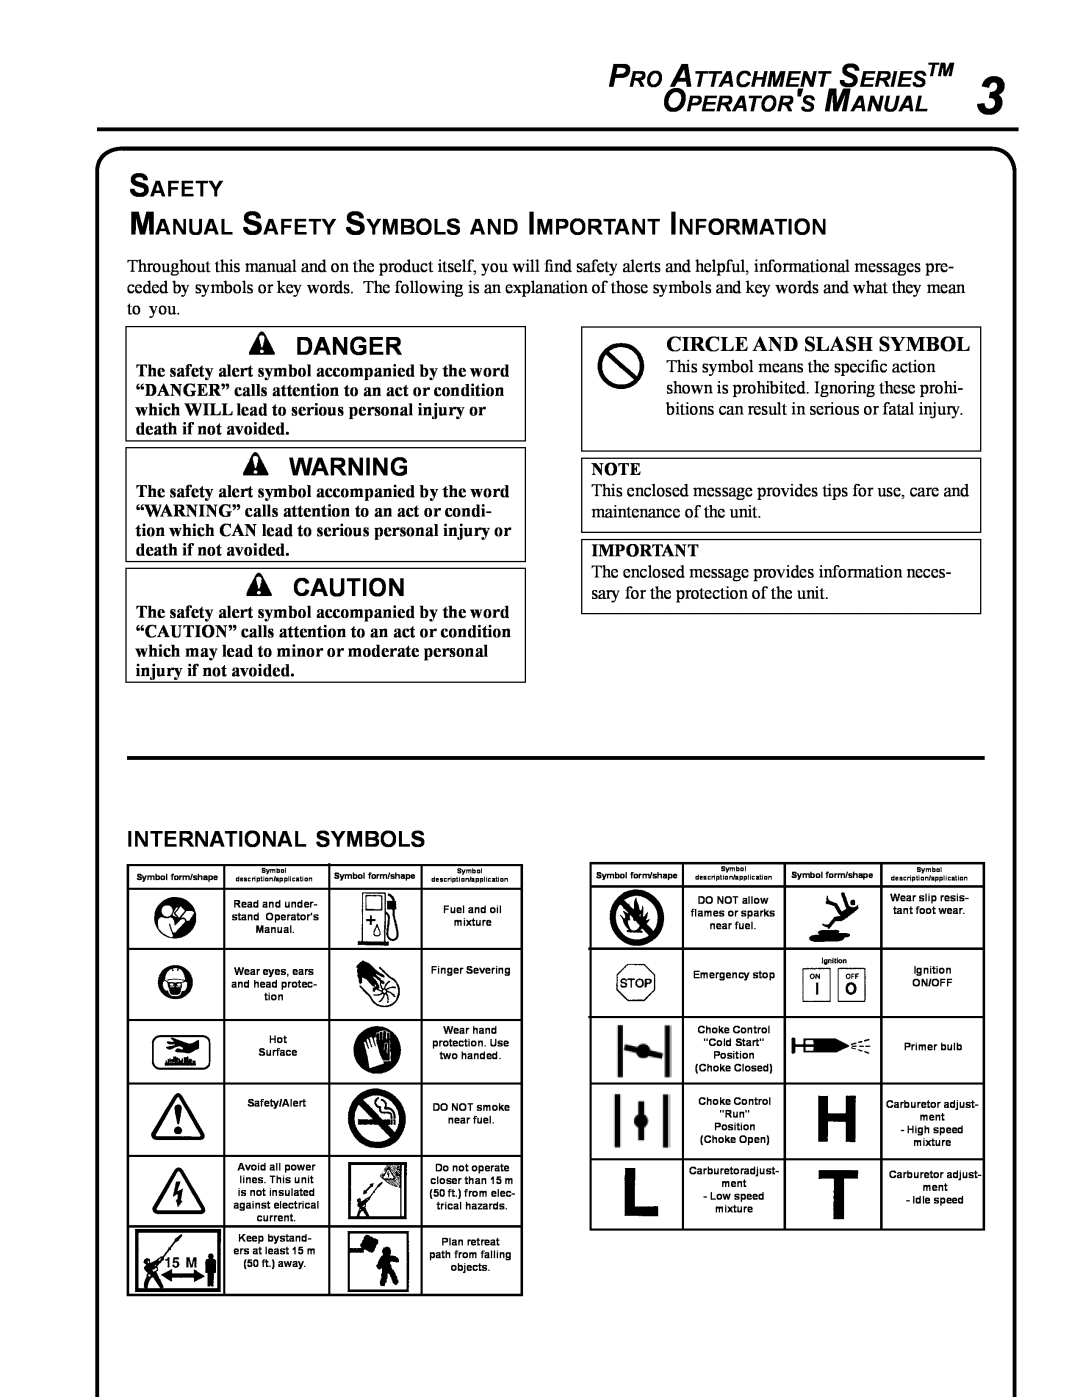 Echo PAS-265 Danger, Pro Attachment SeriesTM Operators Manual, Safety Manual Safety Symbols and Important Information 